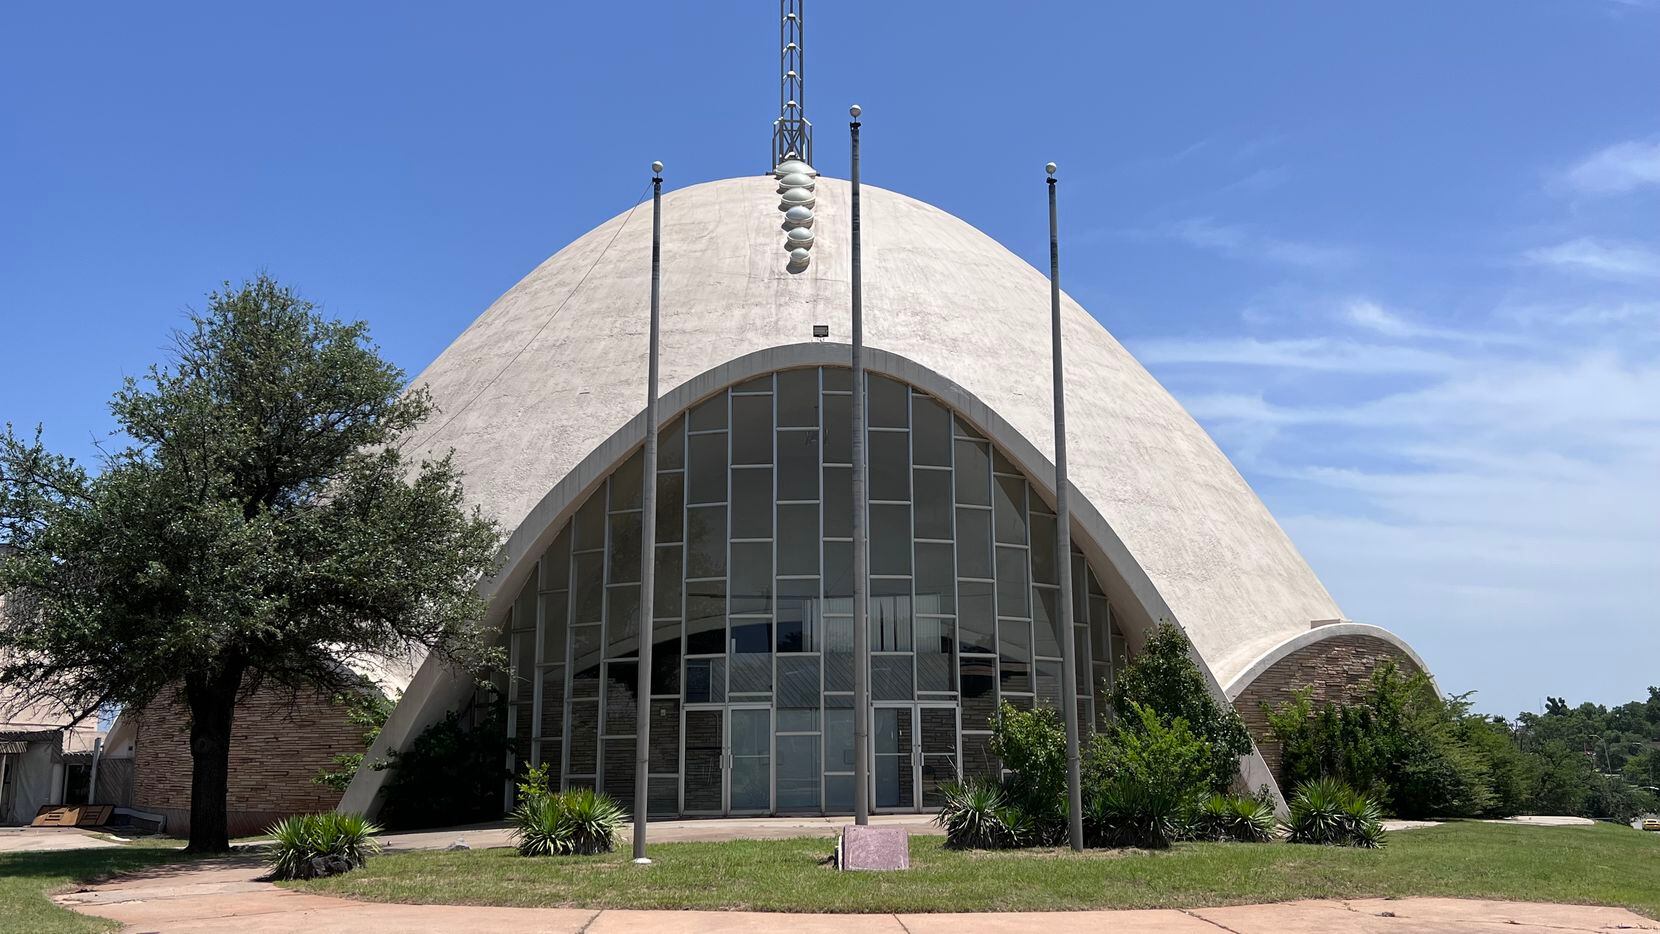 The 1956 First Christian Church of Oklahoma City, better known as the "egg dome," designed...